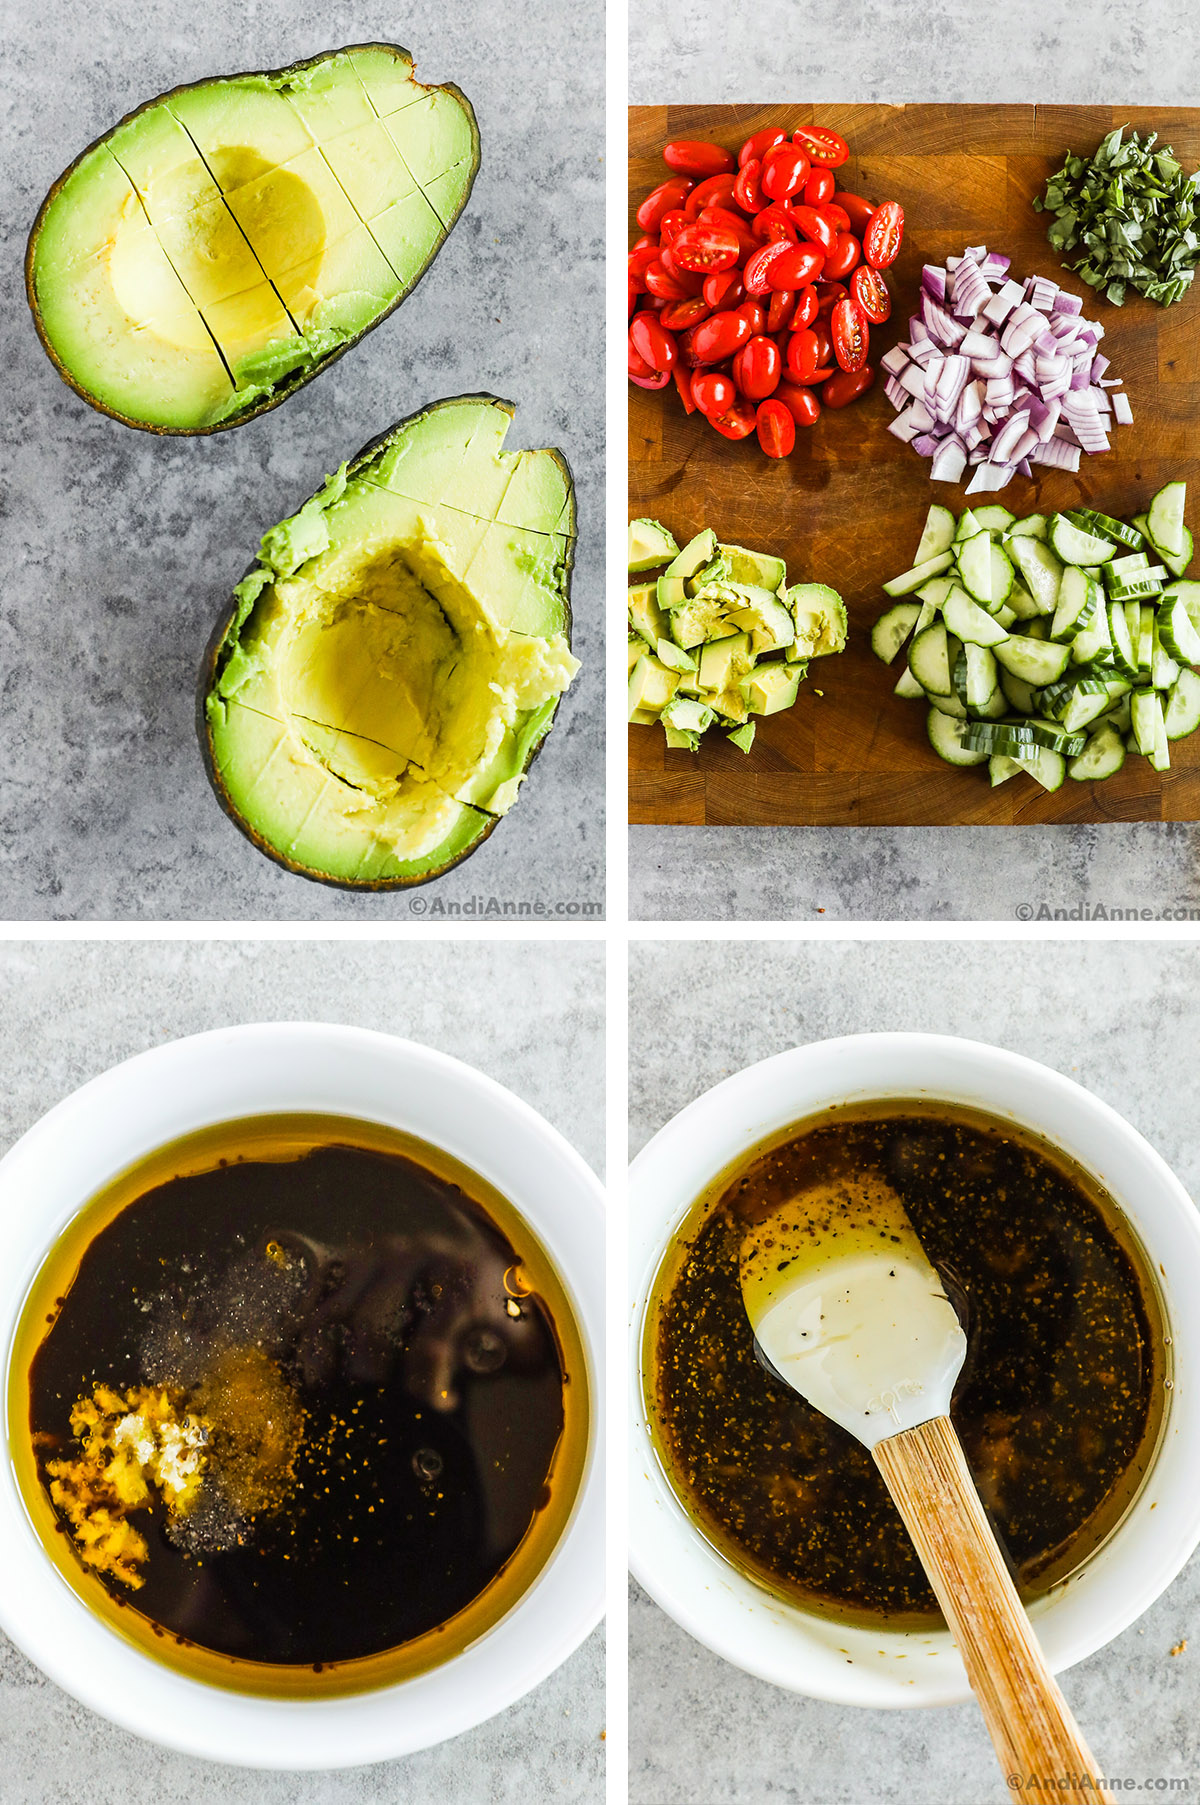 Four images including a sliced avocado, various chopped vegetables on a cutting board, and last two are bowls with dark brown salad dressing ingredients.